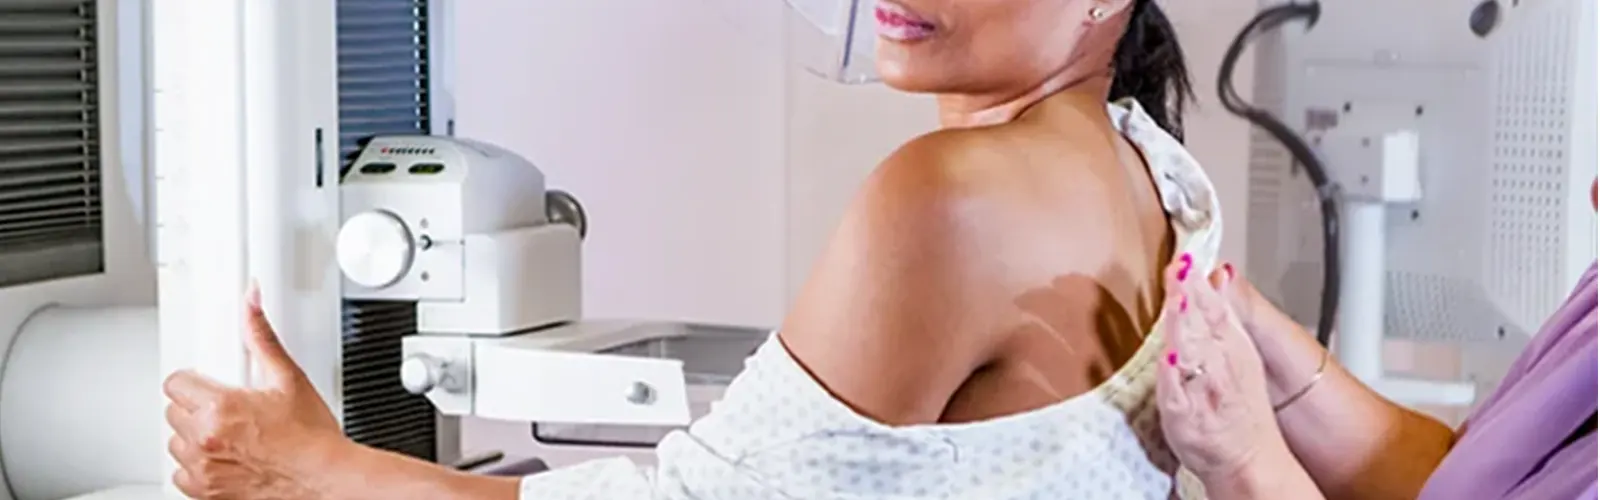 What Is The Main Purpose Of Mammography?